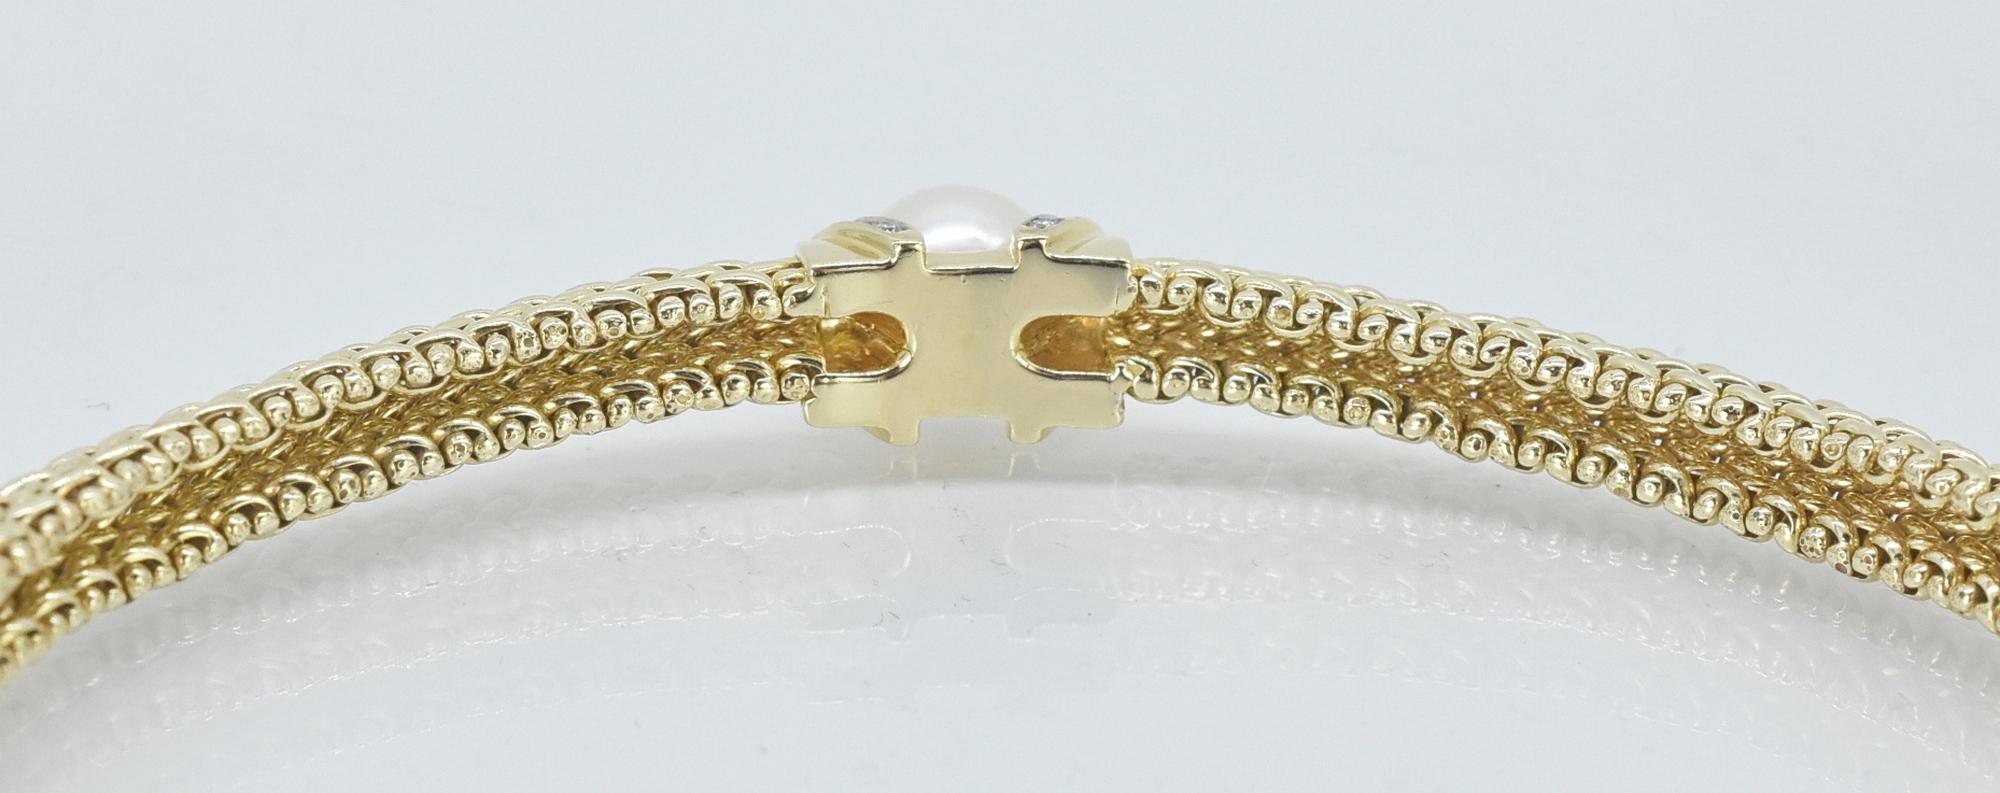 14k Rope Design Bracelet with Pearl, SKD, Scott Keating Design In Good Condition For Sale In Toledo, OH